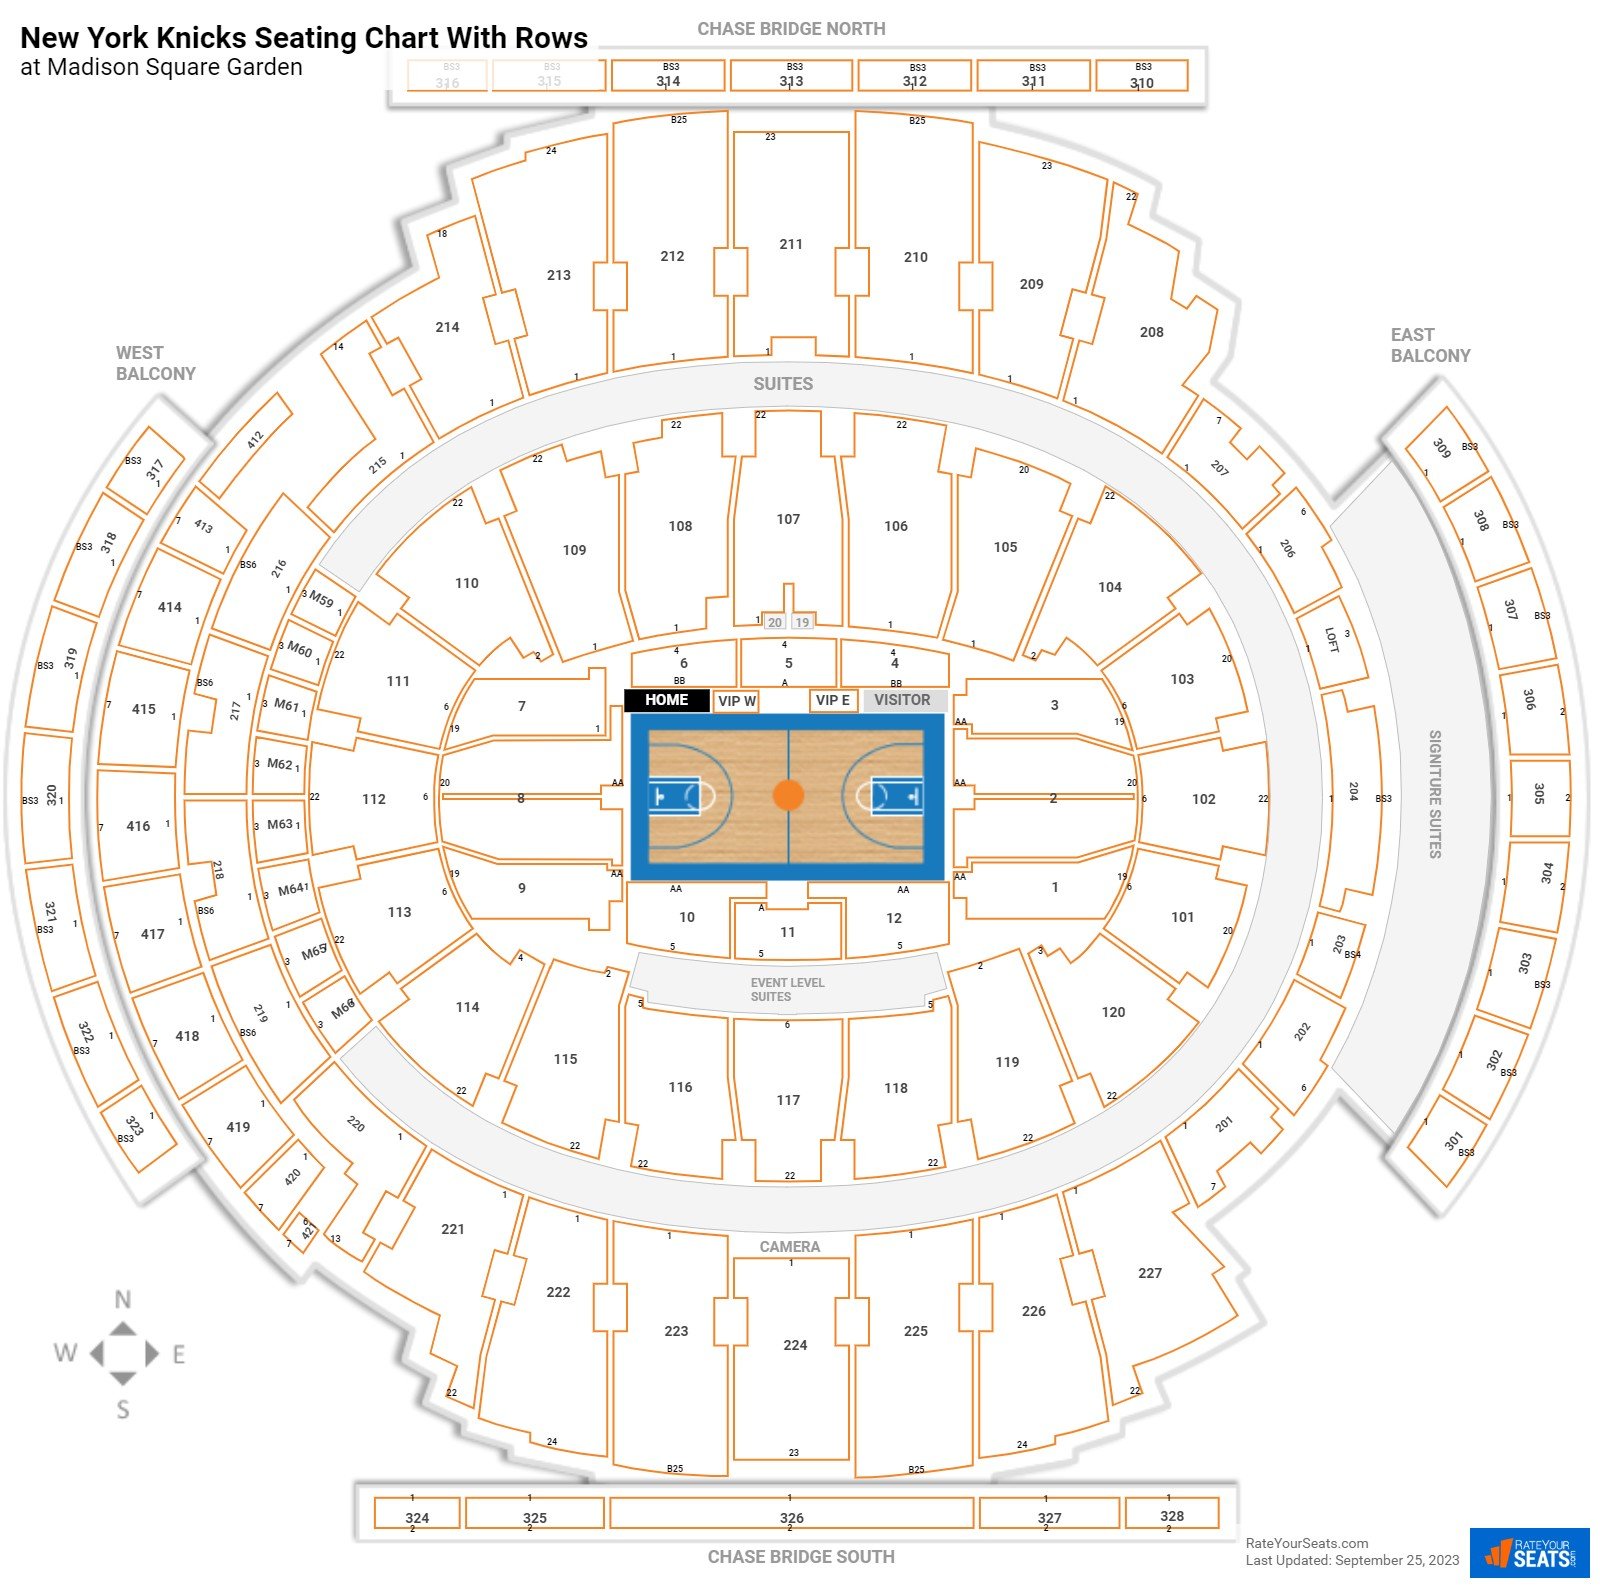 New York Knicks Seating Charts At Madison Square Garden Rateyourseats Com